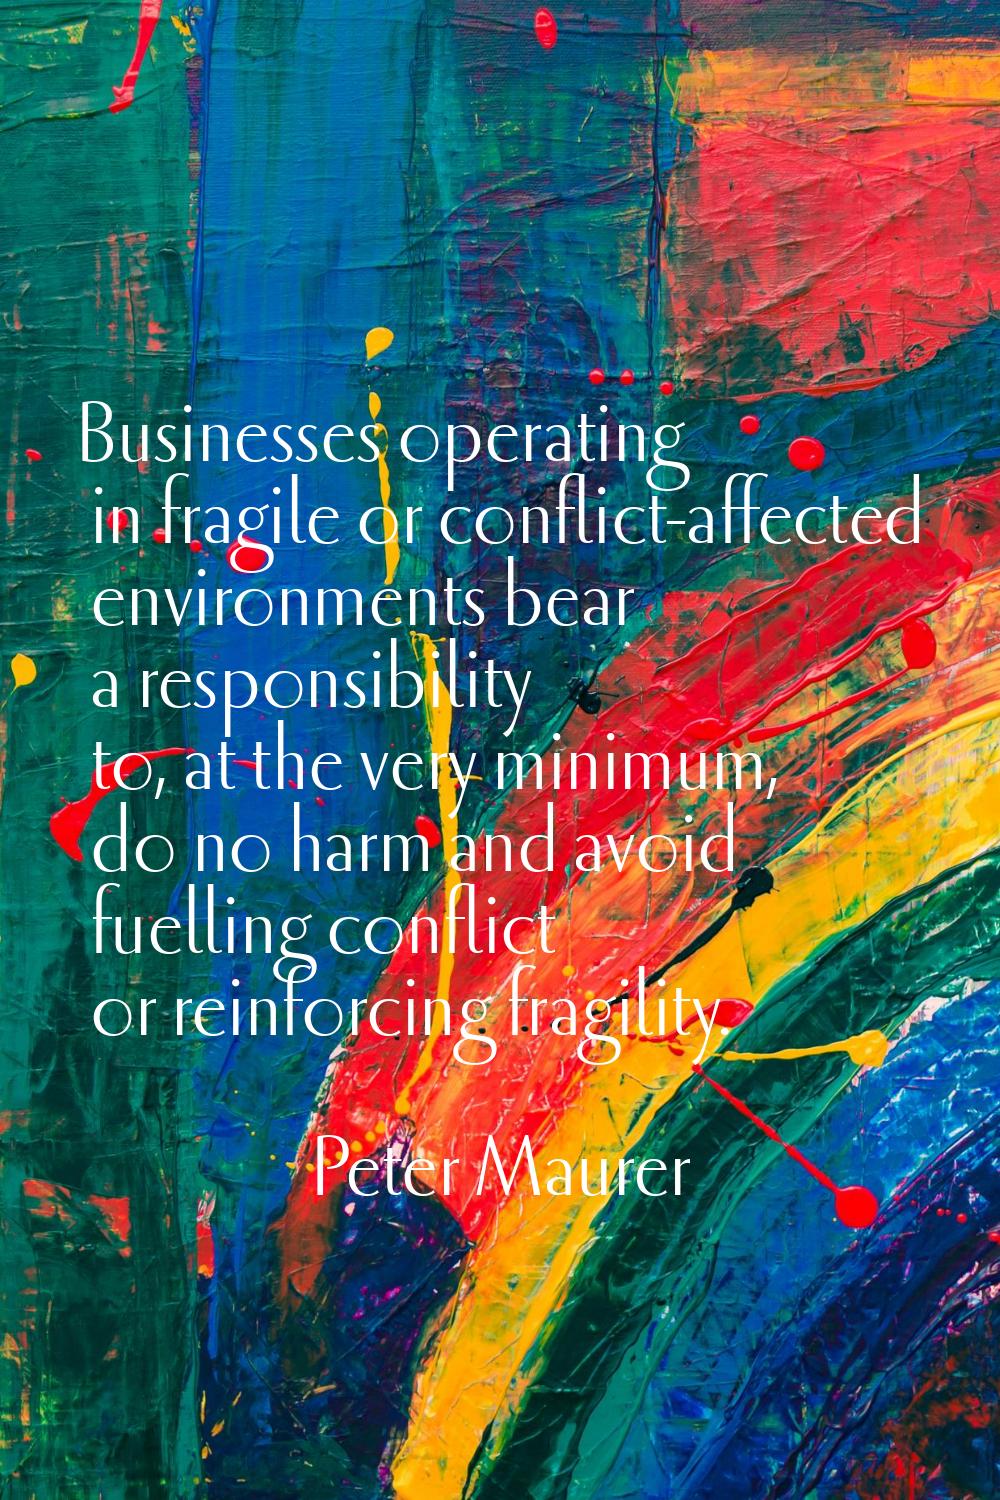 Businesses operating in fragile or conflict-affected environments bear a responsibility to, at the 